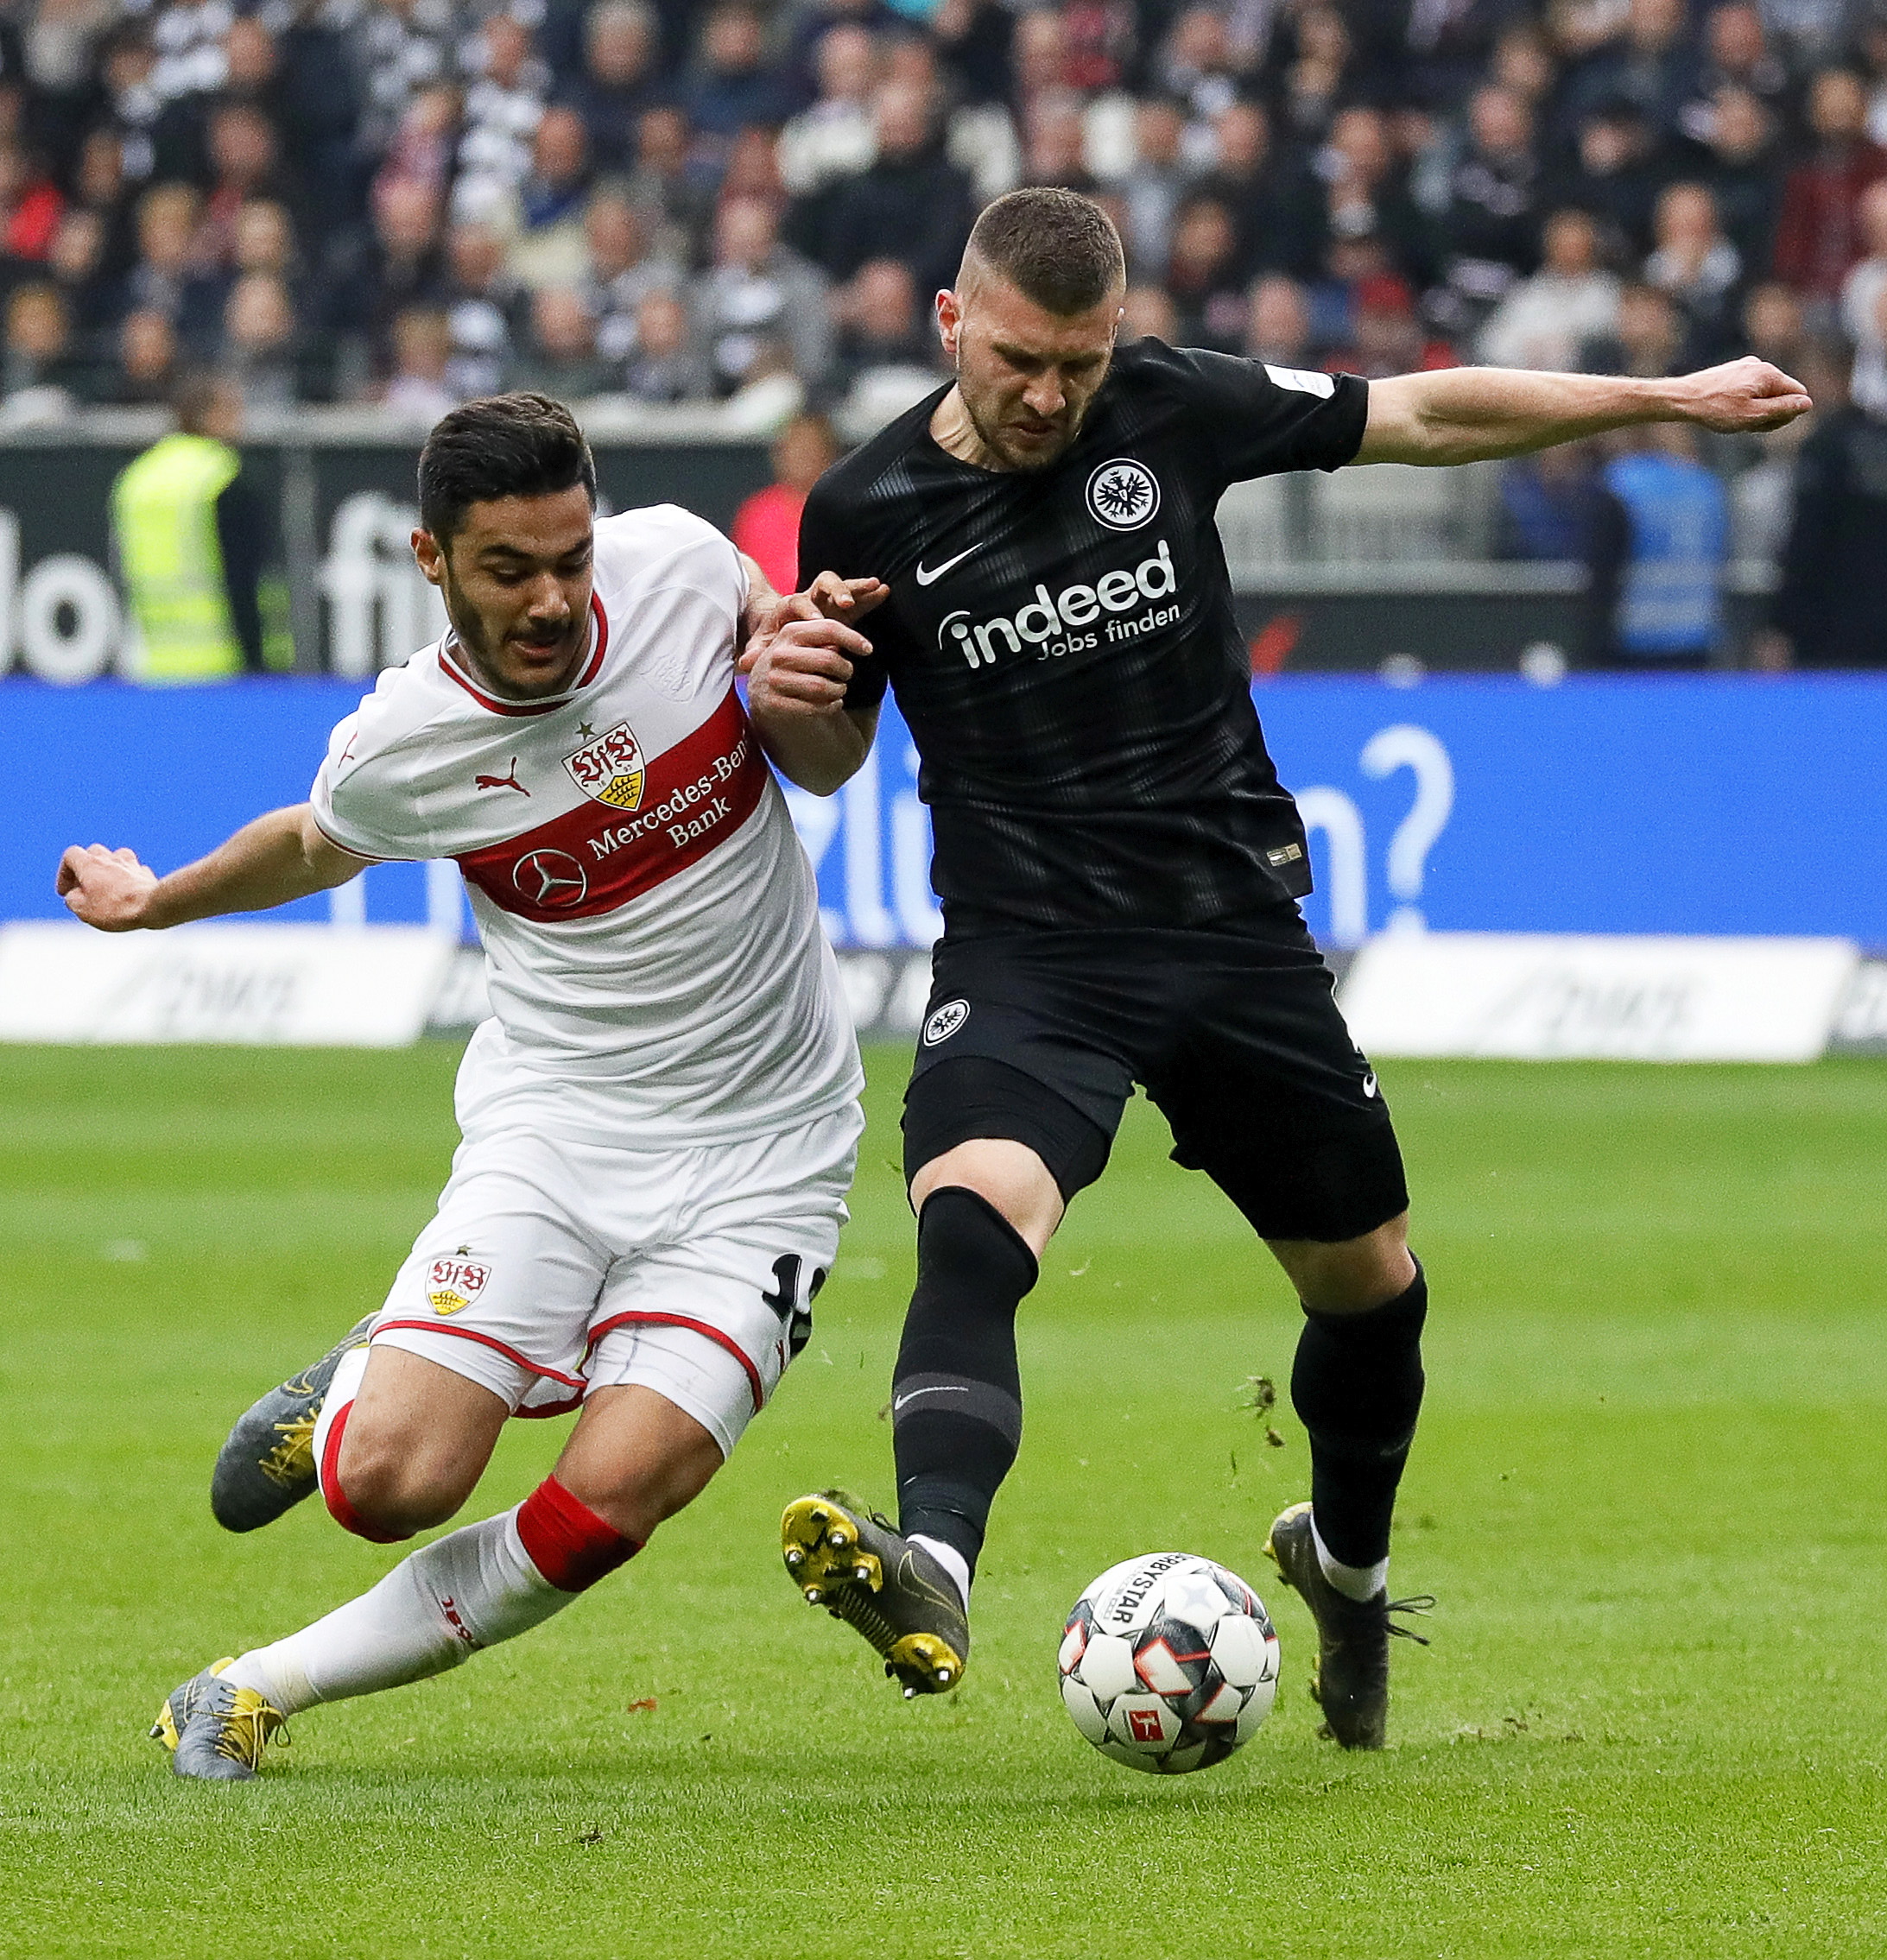 epa07476800 Frankfurt's Ante Rebic (R) in action against Stuttgart's Ozan Kabak (L) during the German Bundesliga soccer match between Eintracht Frankfurt and VfB Stuttgart in Frankfurt, Germany, 31 March 2019.  EPA/RONALD WITTEK CONDITIONS - ATTENTION: The DFL regulations prohibit any use of photographs as image sequences and/or quasi-video.